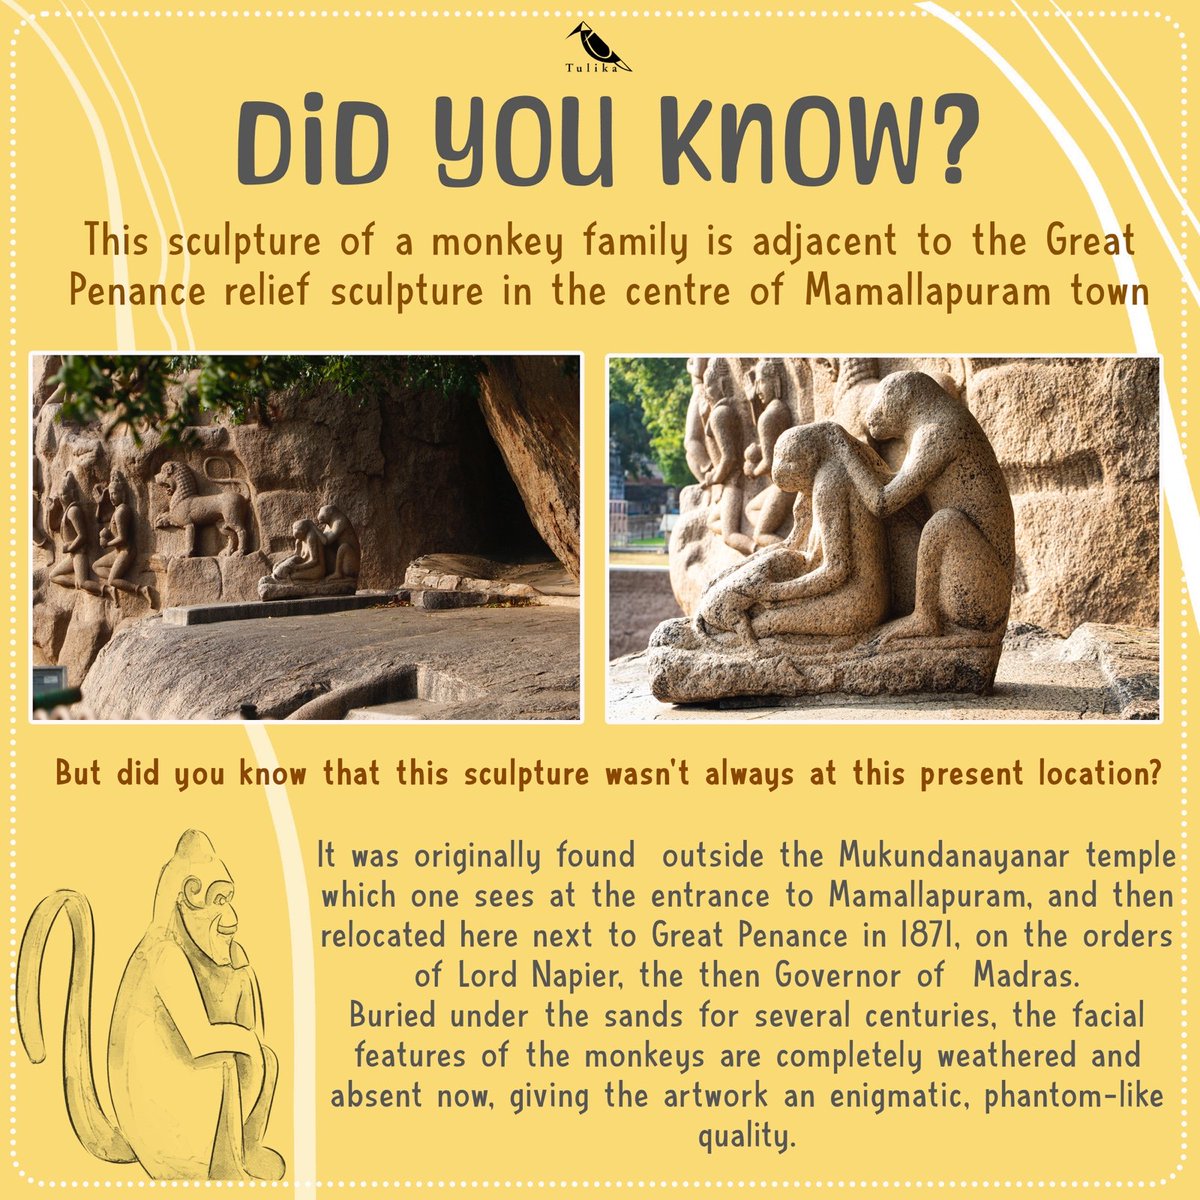 Read more such interesting facts about the open-air museum that is Mamallapuram in in our newest book Sculpted Stones : Mysteries of Mamallapuram, written by Ashwin Prabhu and accompanied by vivid photographs by Nithya V. Available for pre-order now on tulikabooks.com